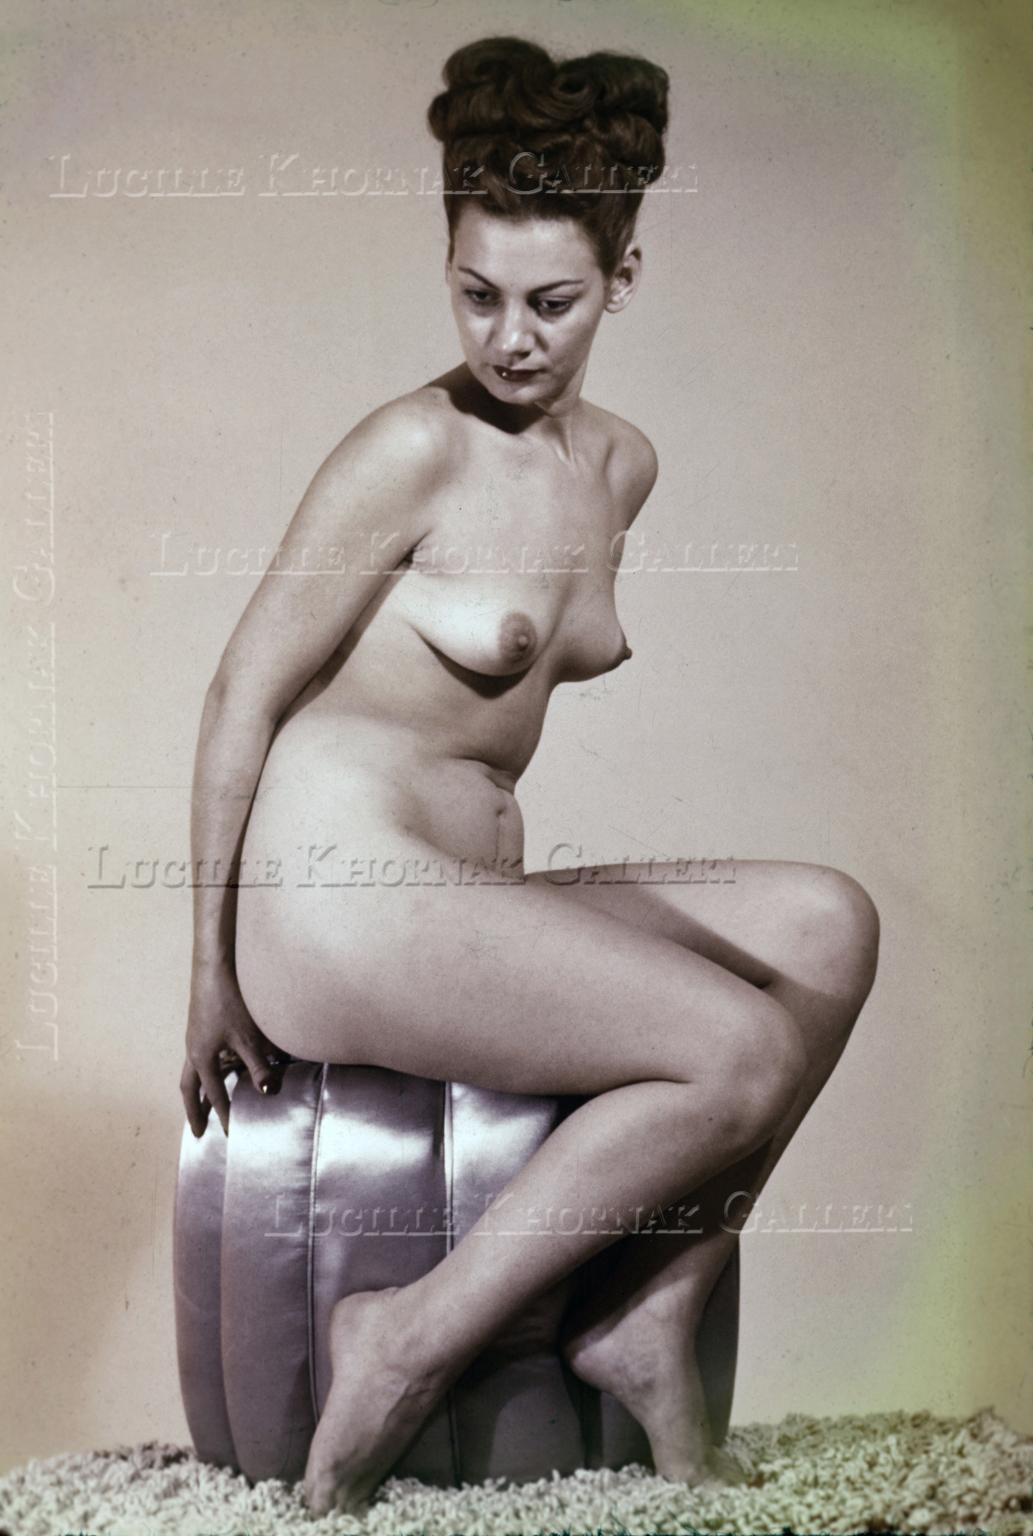 Unknown Color Photograph - Female Nude 1950s